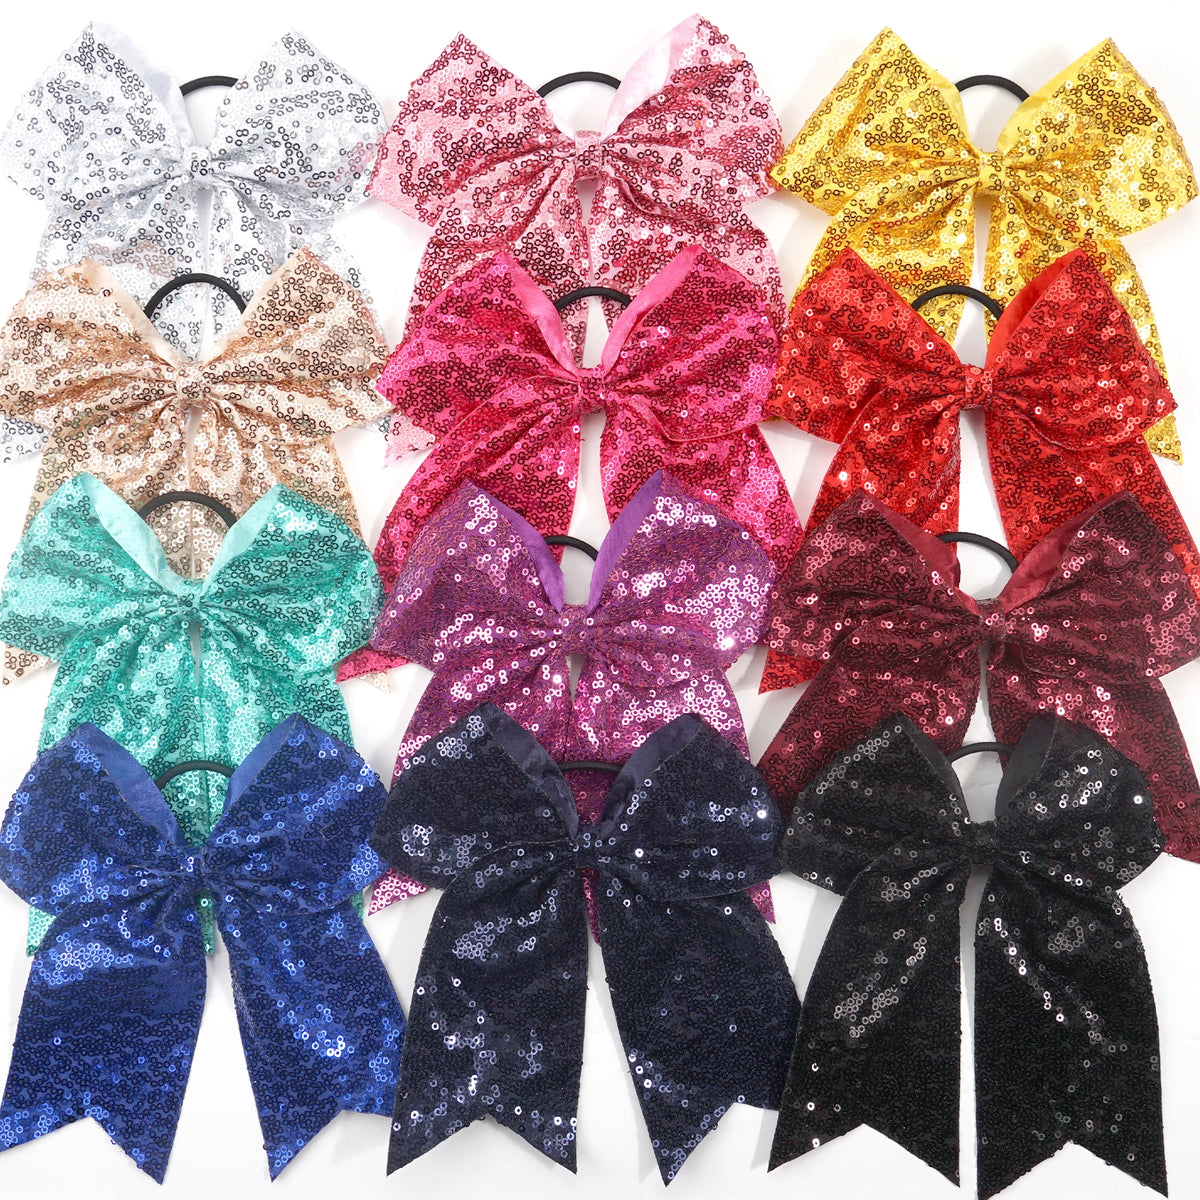 12Pcs 7.5" Bling Sparkly Glitter Sequins Pigtail Bows for kid Girls Large cheerleading bows Ponytail Holder Elastic Hair Ties